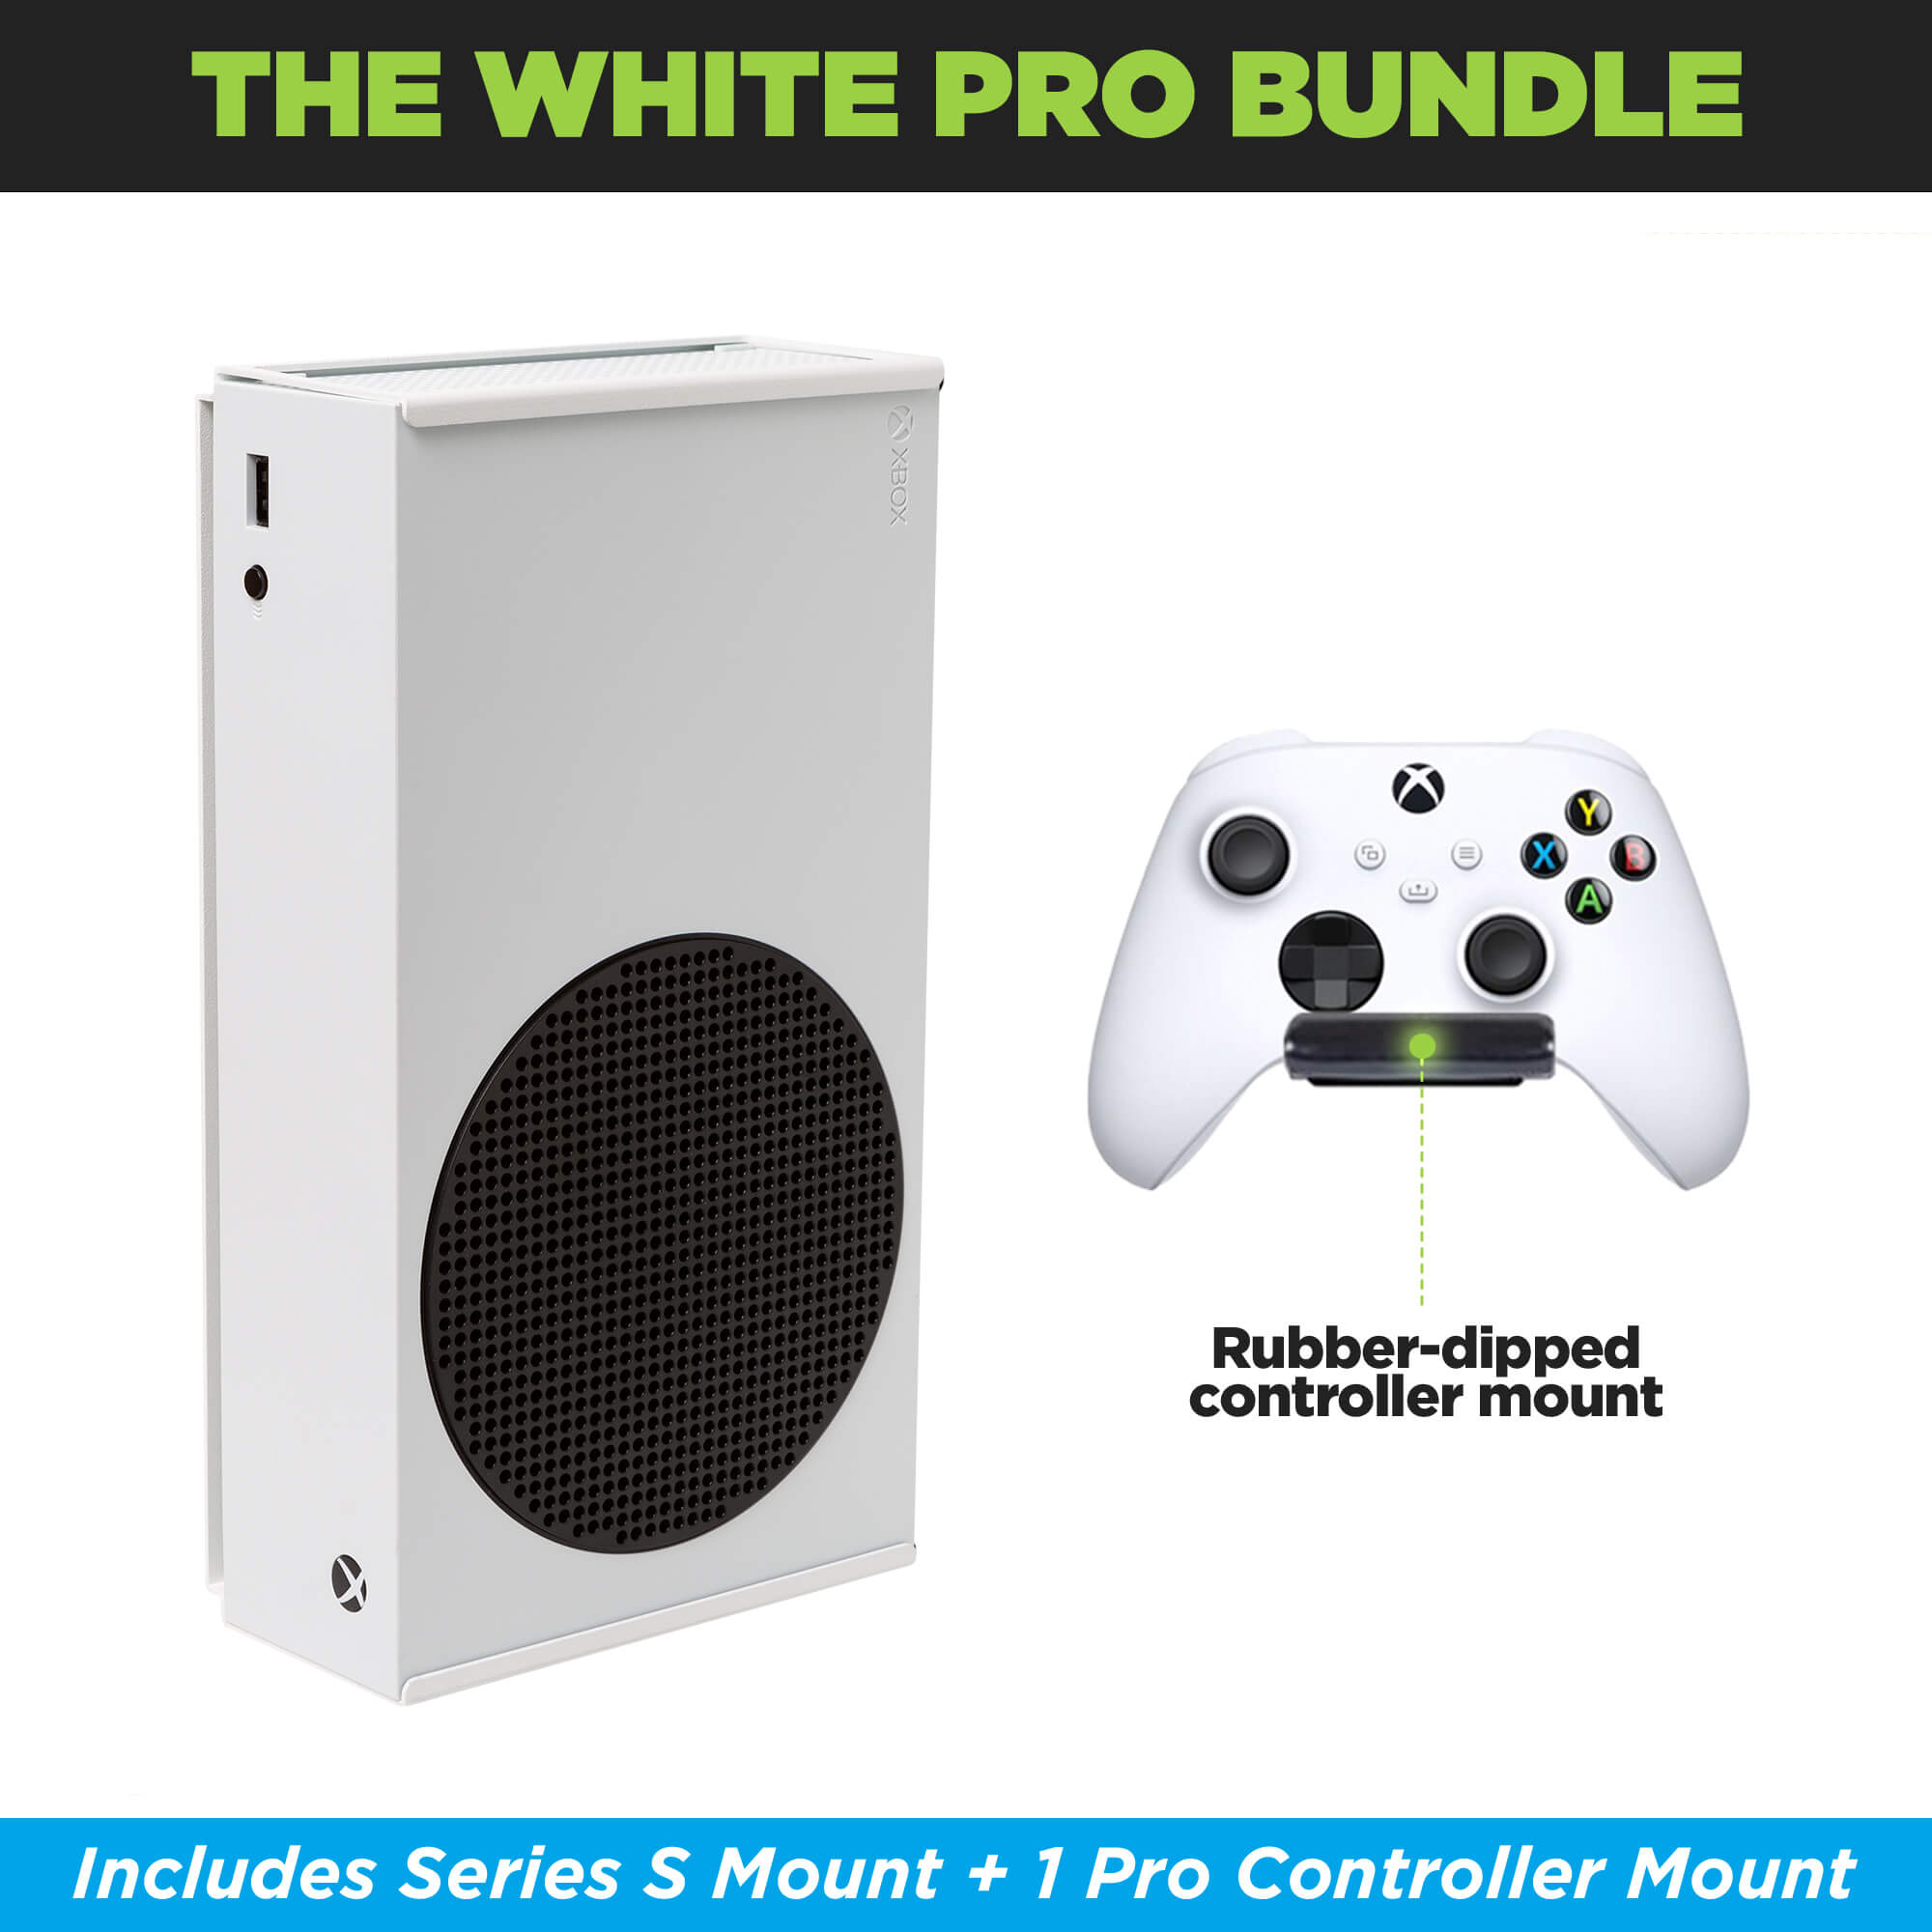 HIDEit Xbox Series S Pro Bundle comes with one Xbox Series S Wall Mount and one Xbox controller mount